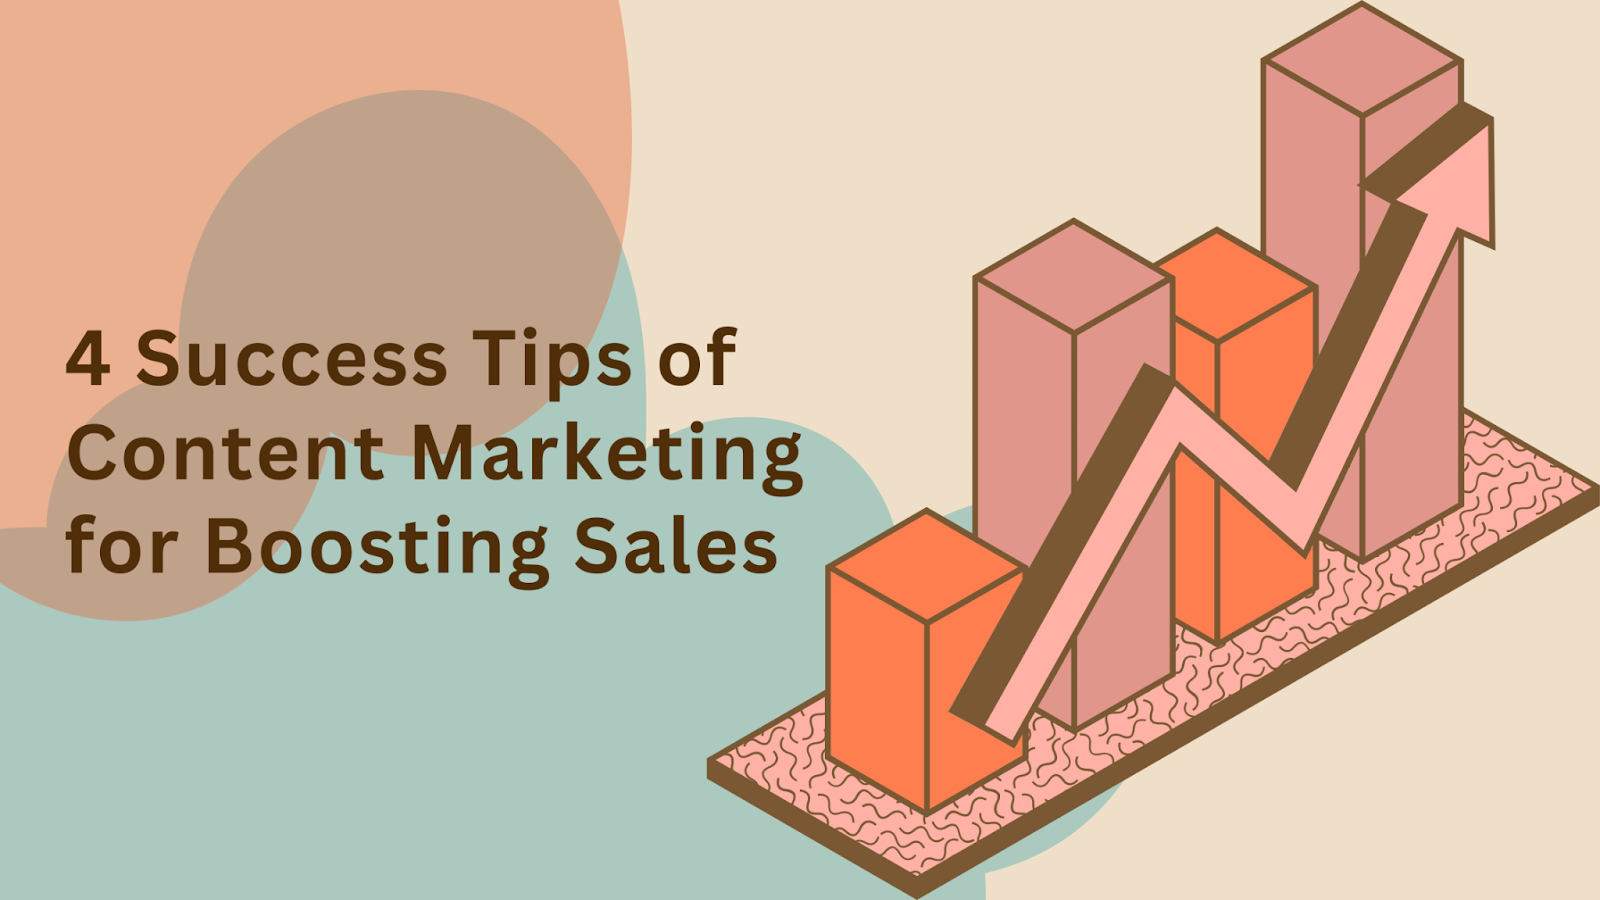 How Can Content Marketing Help Businesses Increase Sales?